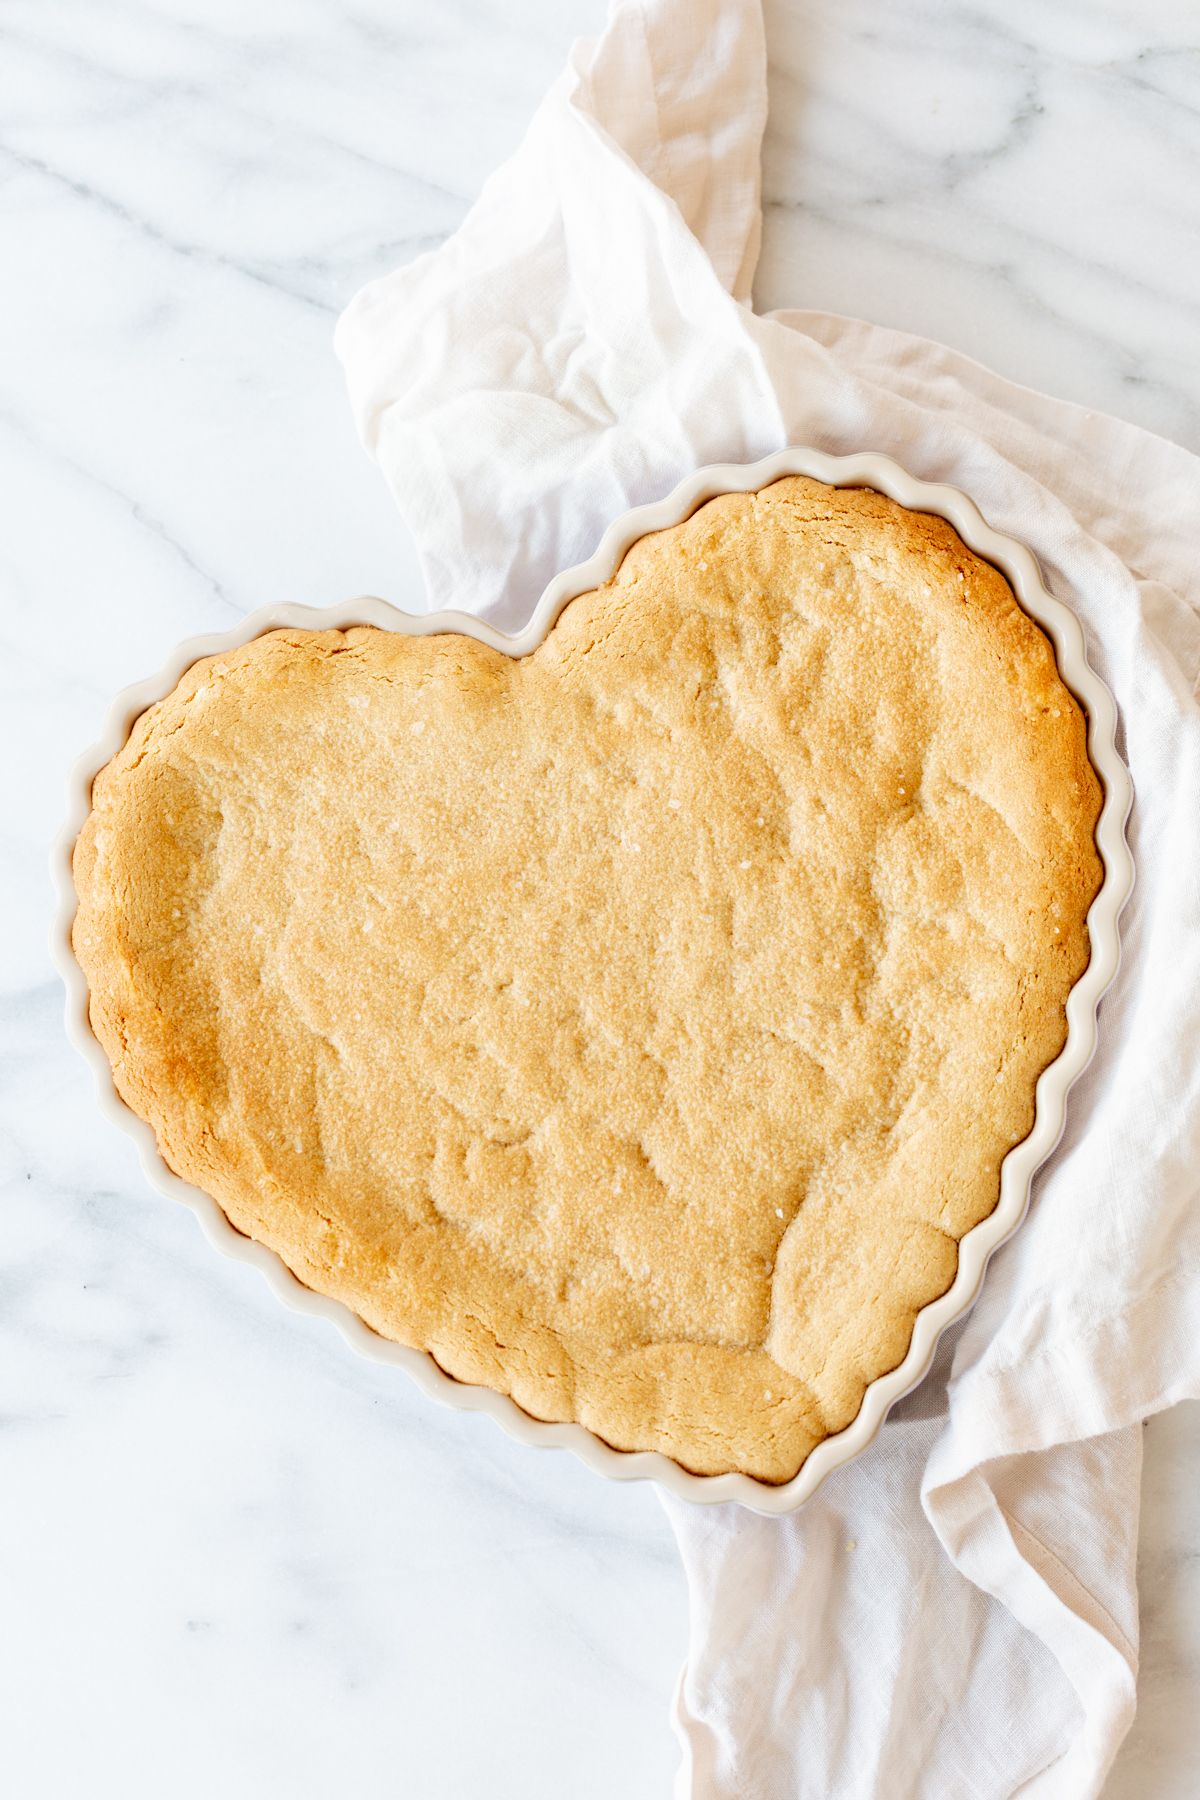 A heart shaped peanut butter cookie cake on a marble countertop.